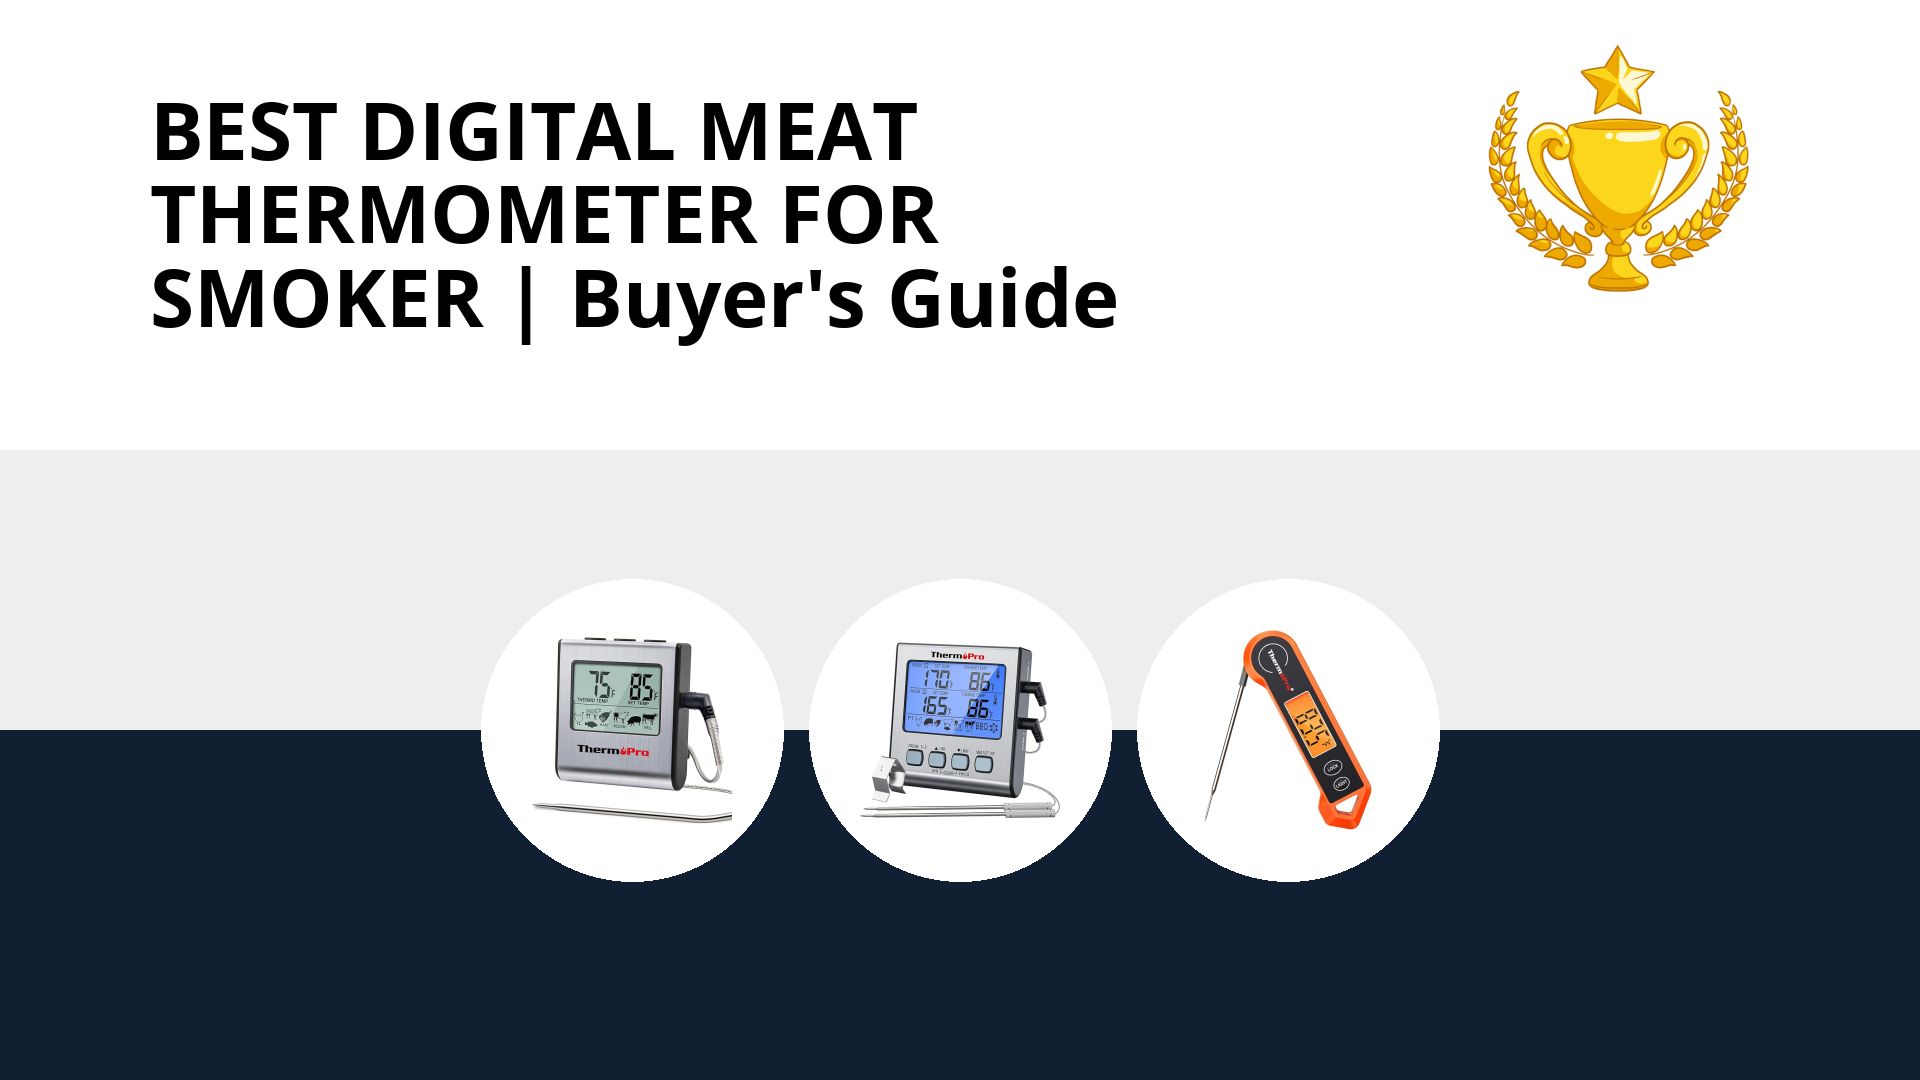 Best Digital Meat Thermometer For Smoker: image